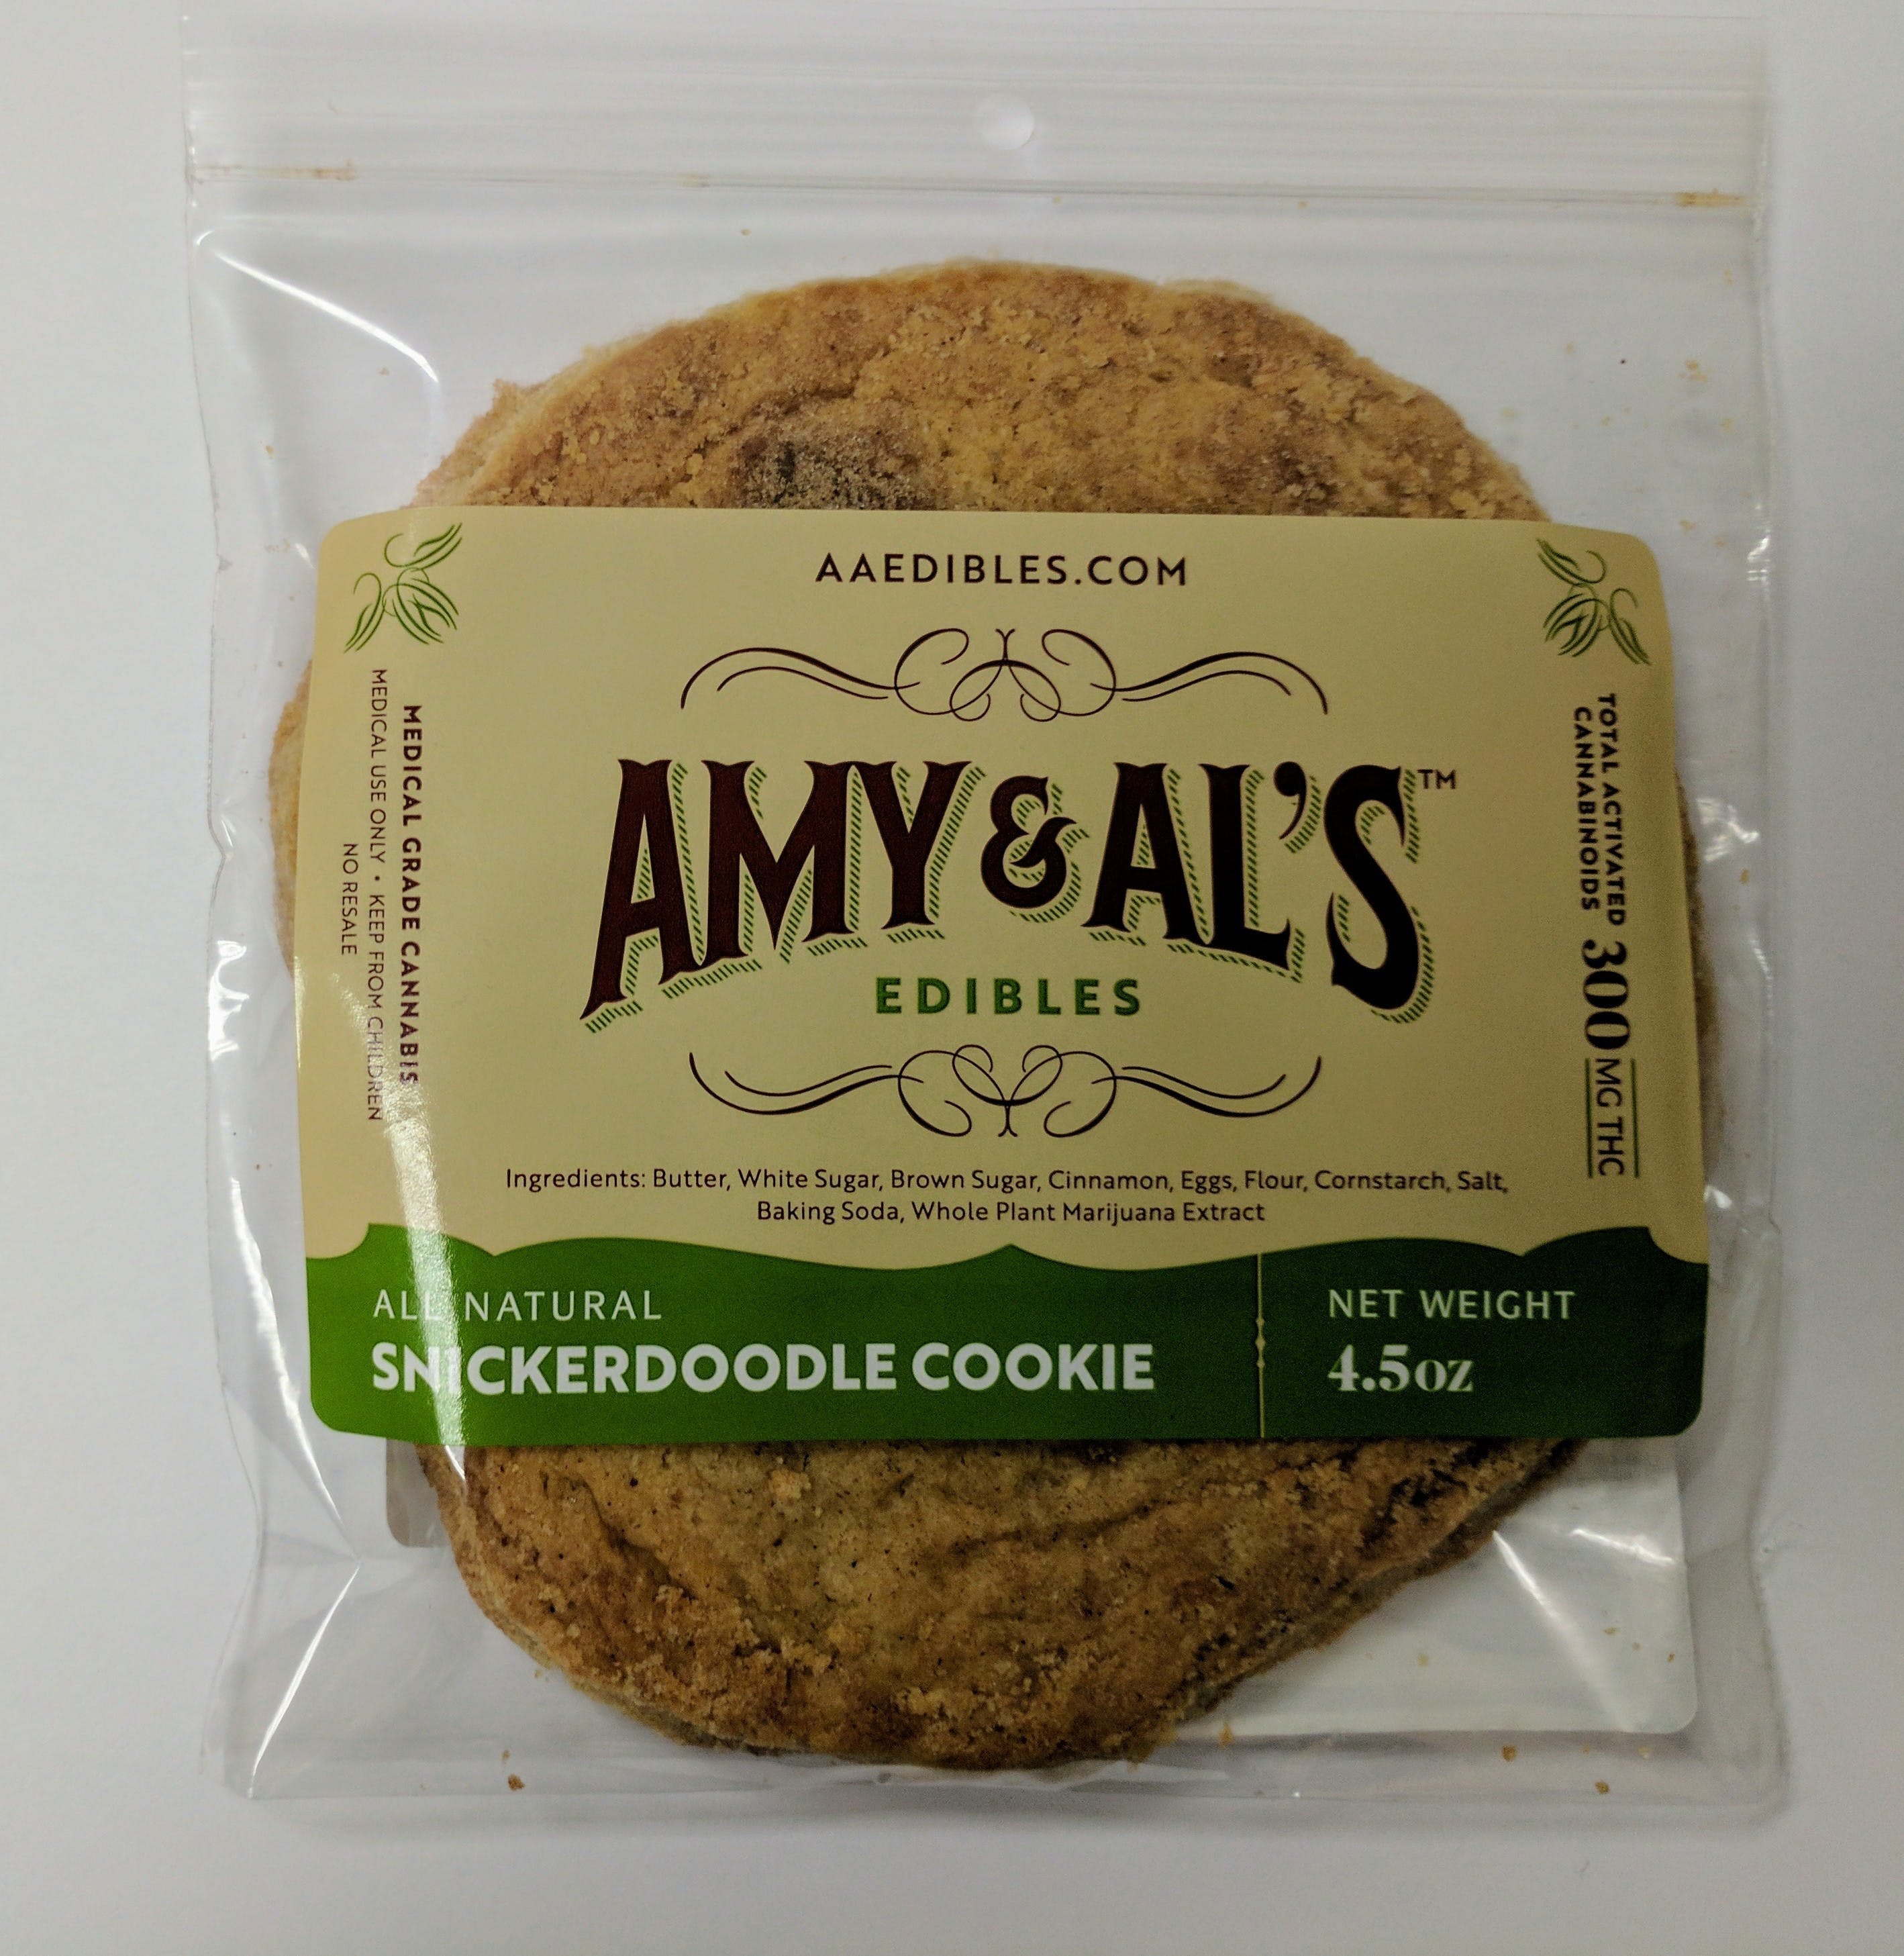 edible-amy-a-als-snickerdoodle-cookie-100mg